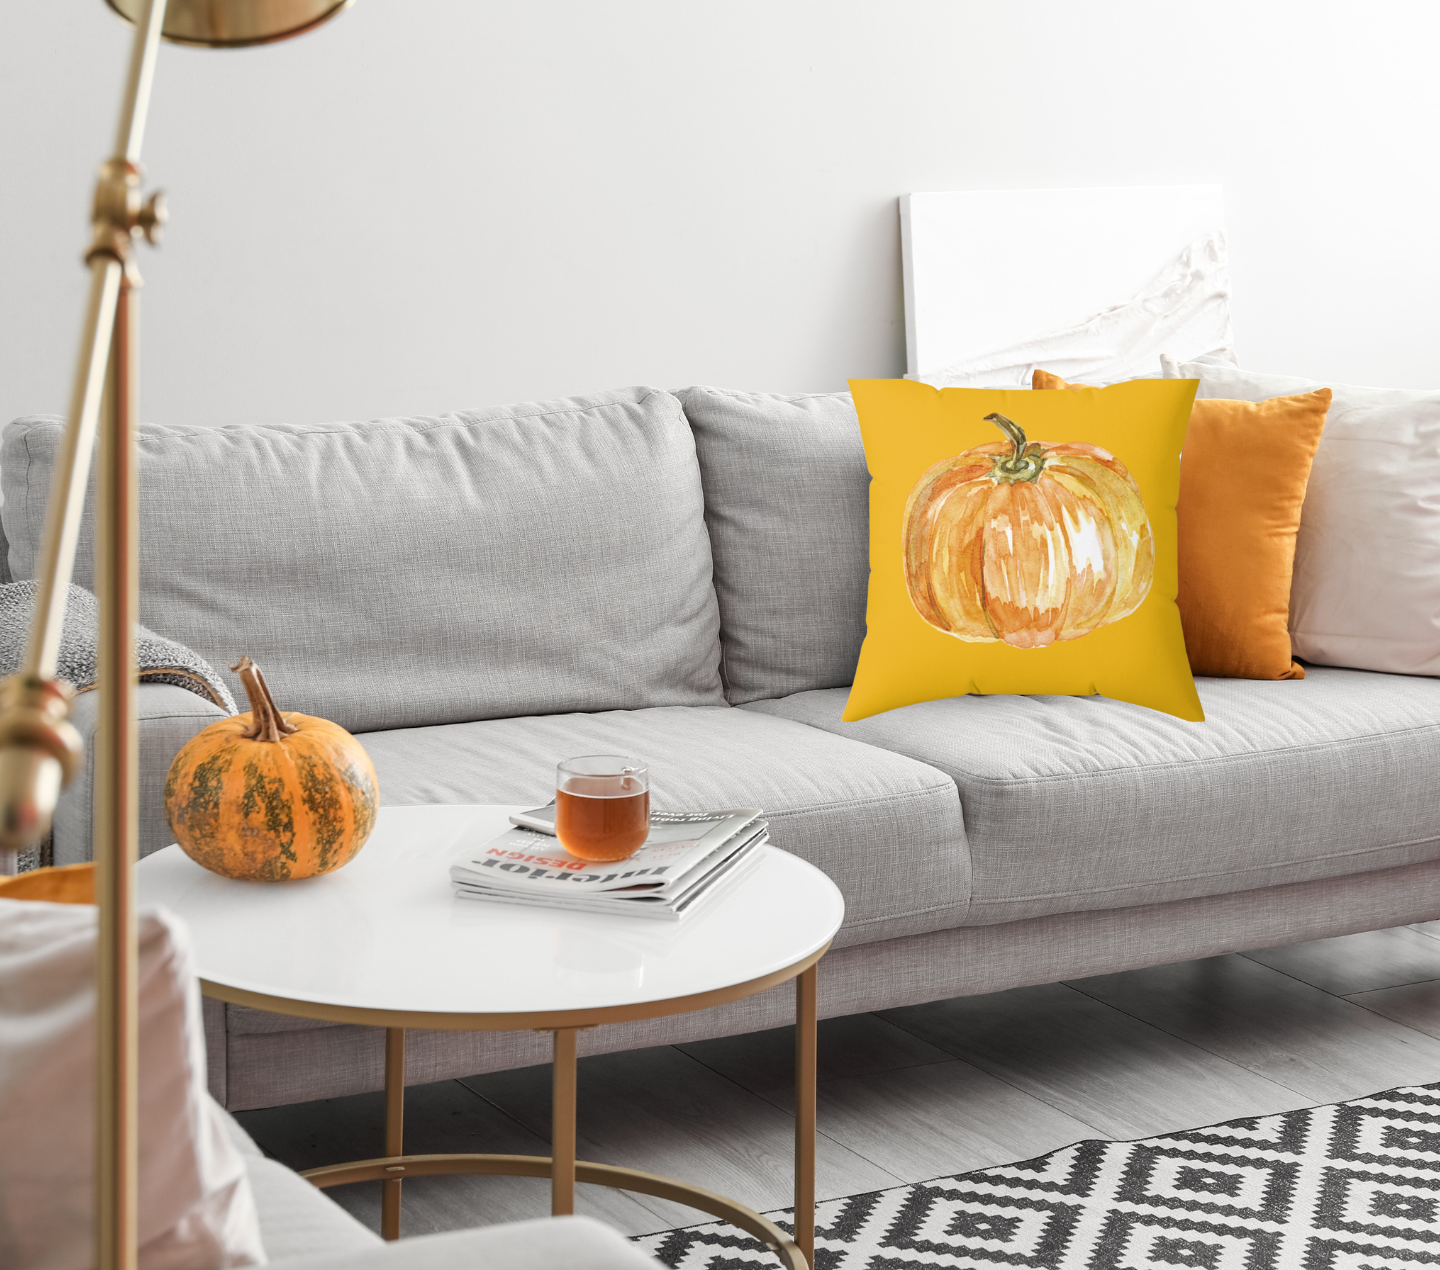 Get trendy with Fall pumpkin pillow decor Spun Polyester Square Pillow - Home Decor available at Good Gift Company. Grab yours for $13.50 today!